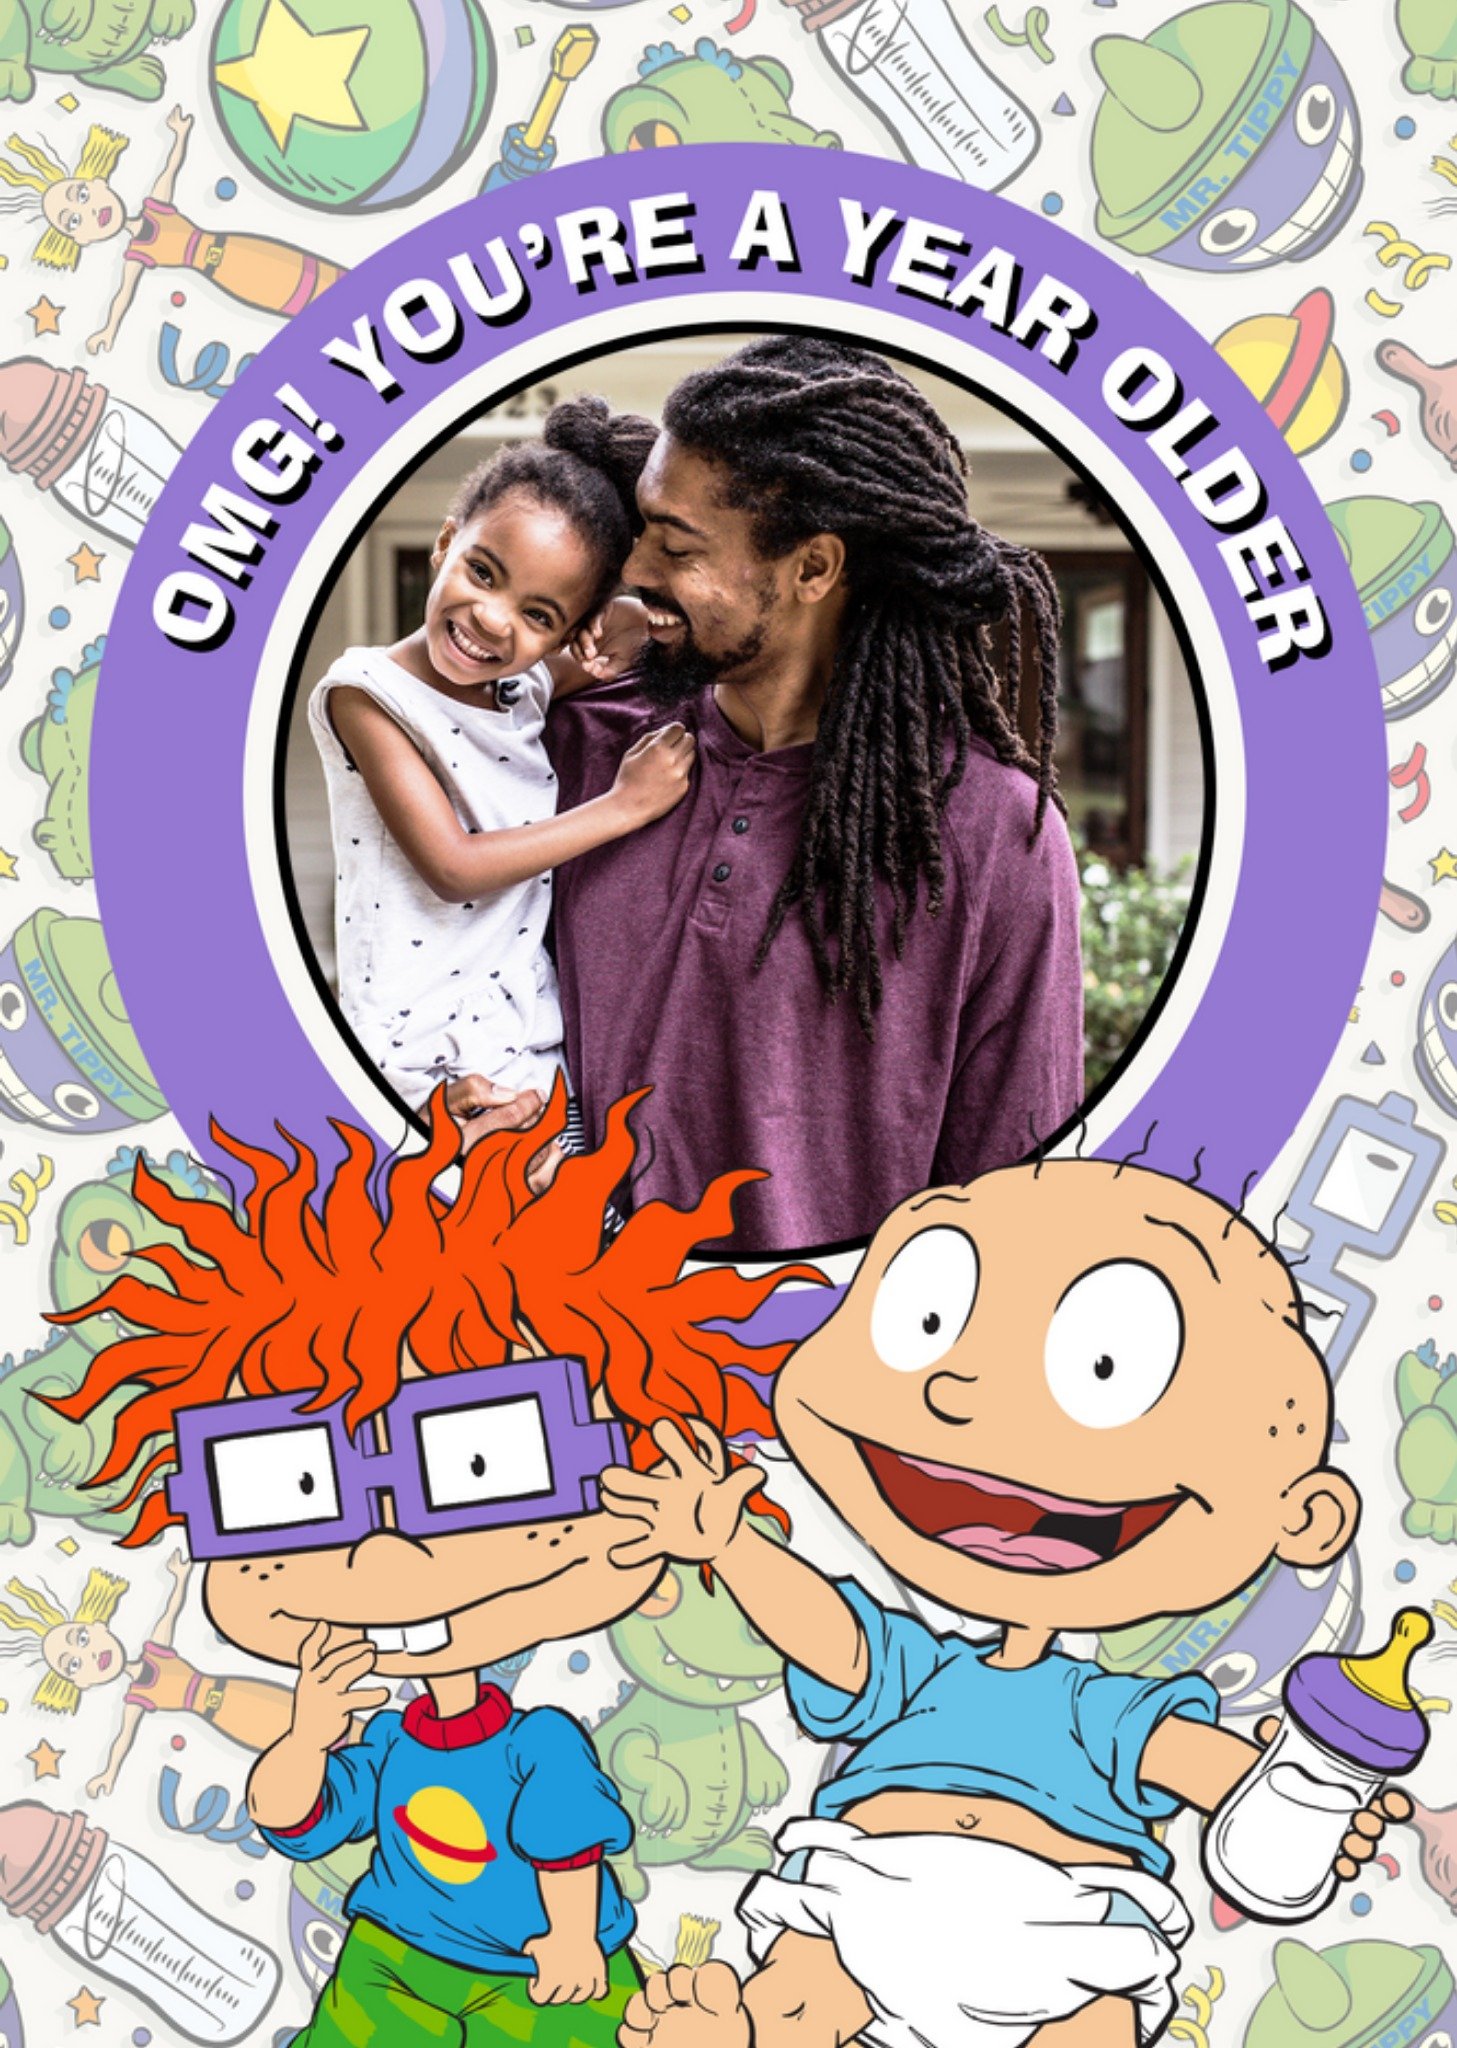 Nickelodeon Rugrats You Are A Year Older Photo Upload Card Ecard